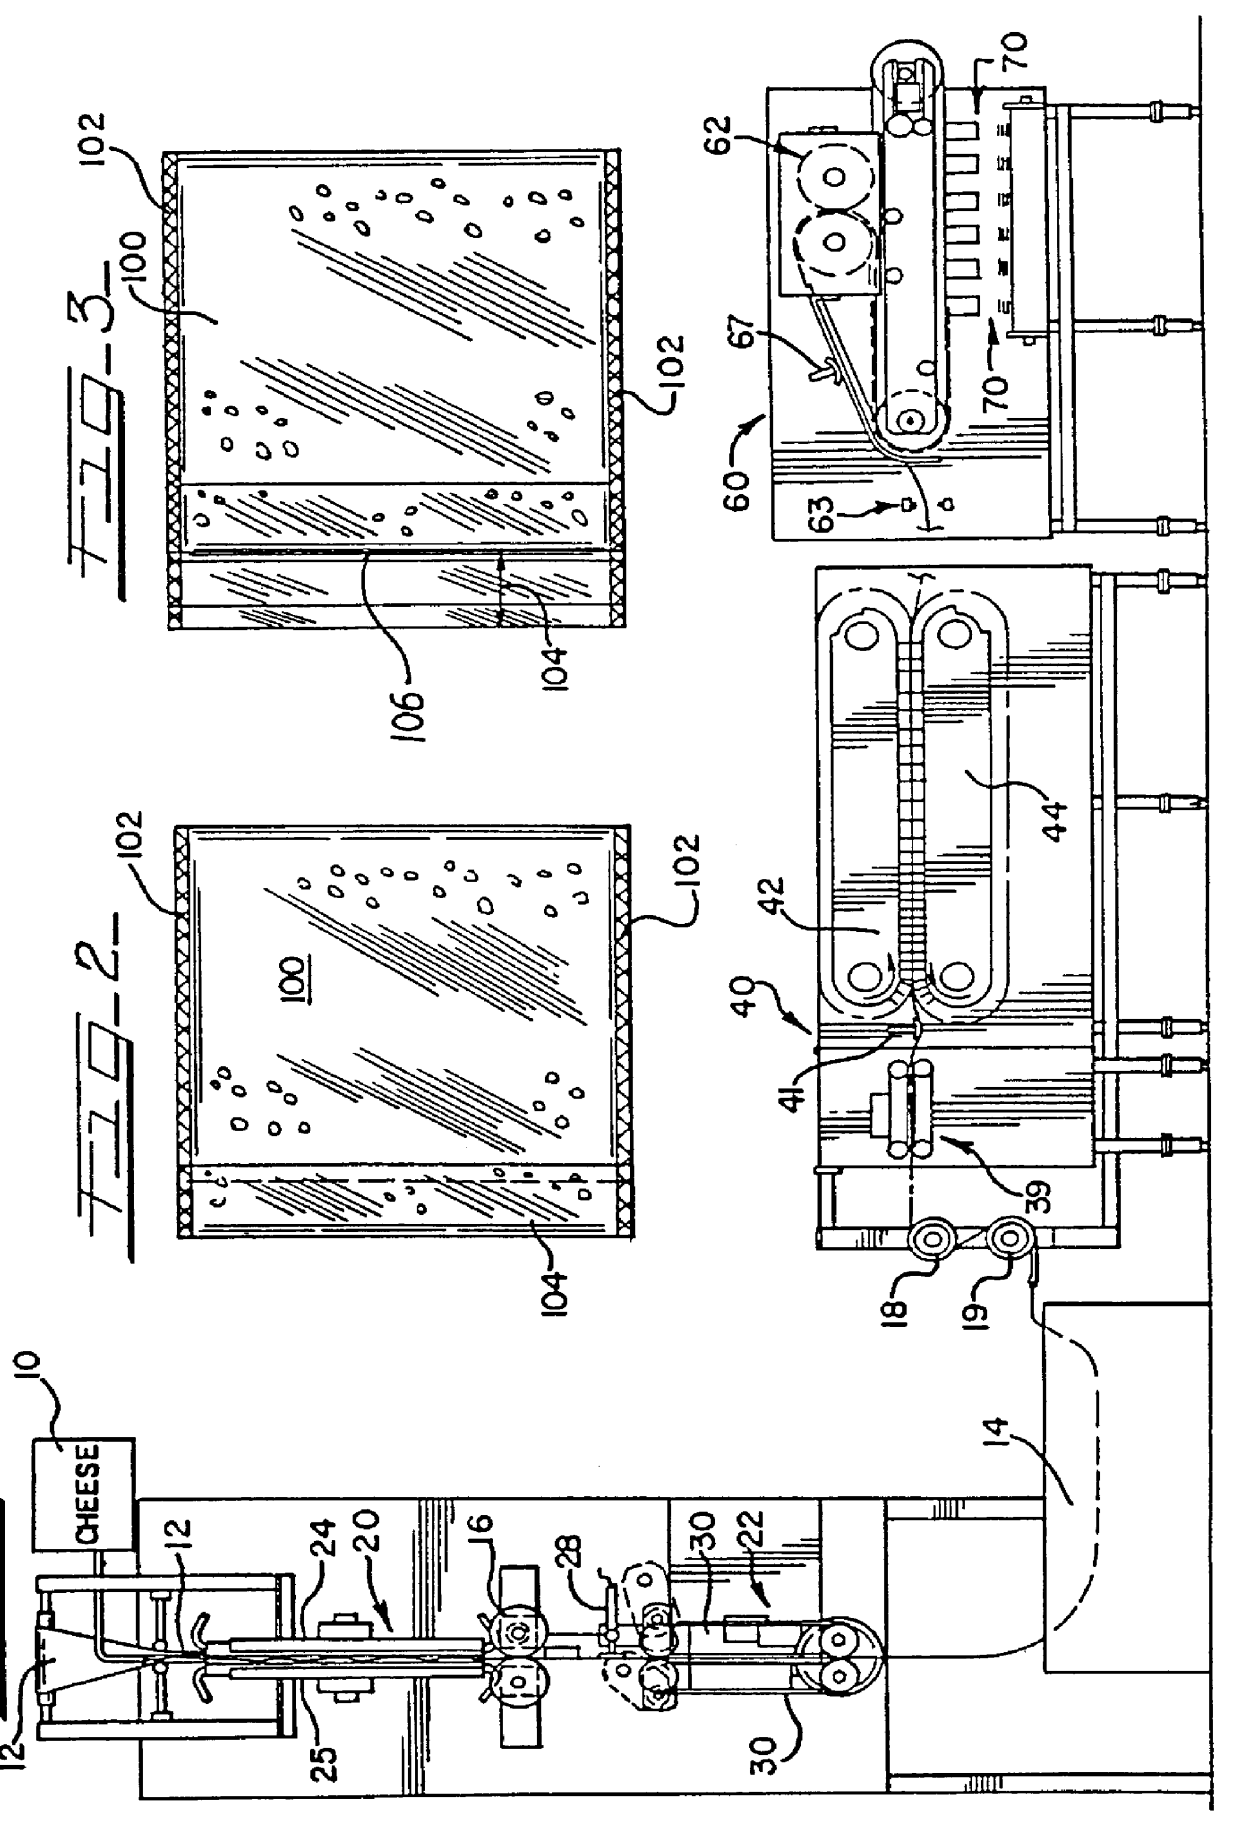 Method and apparatus for forming and hermetically sealing slices of food items